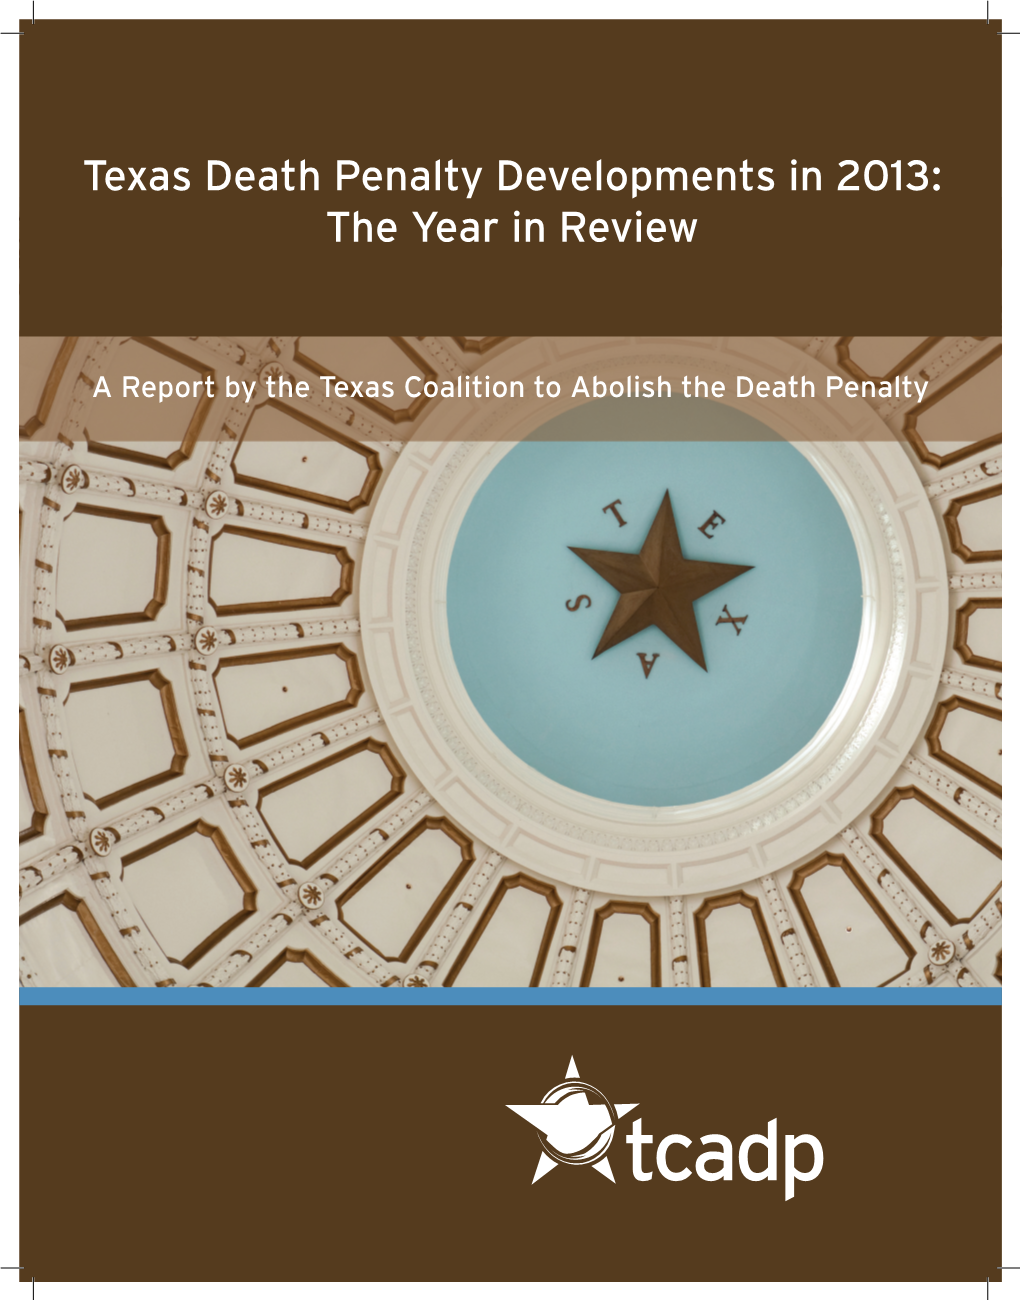 Texas Death Penalty Developments in 2013: the Year in Review